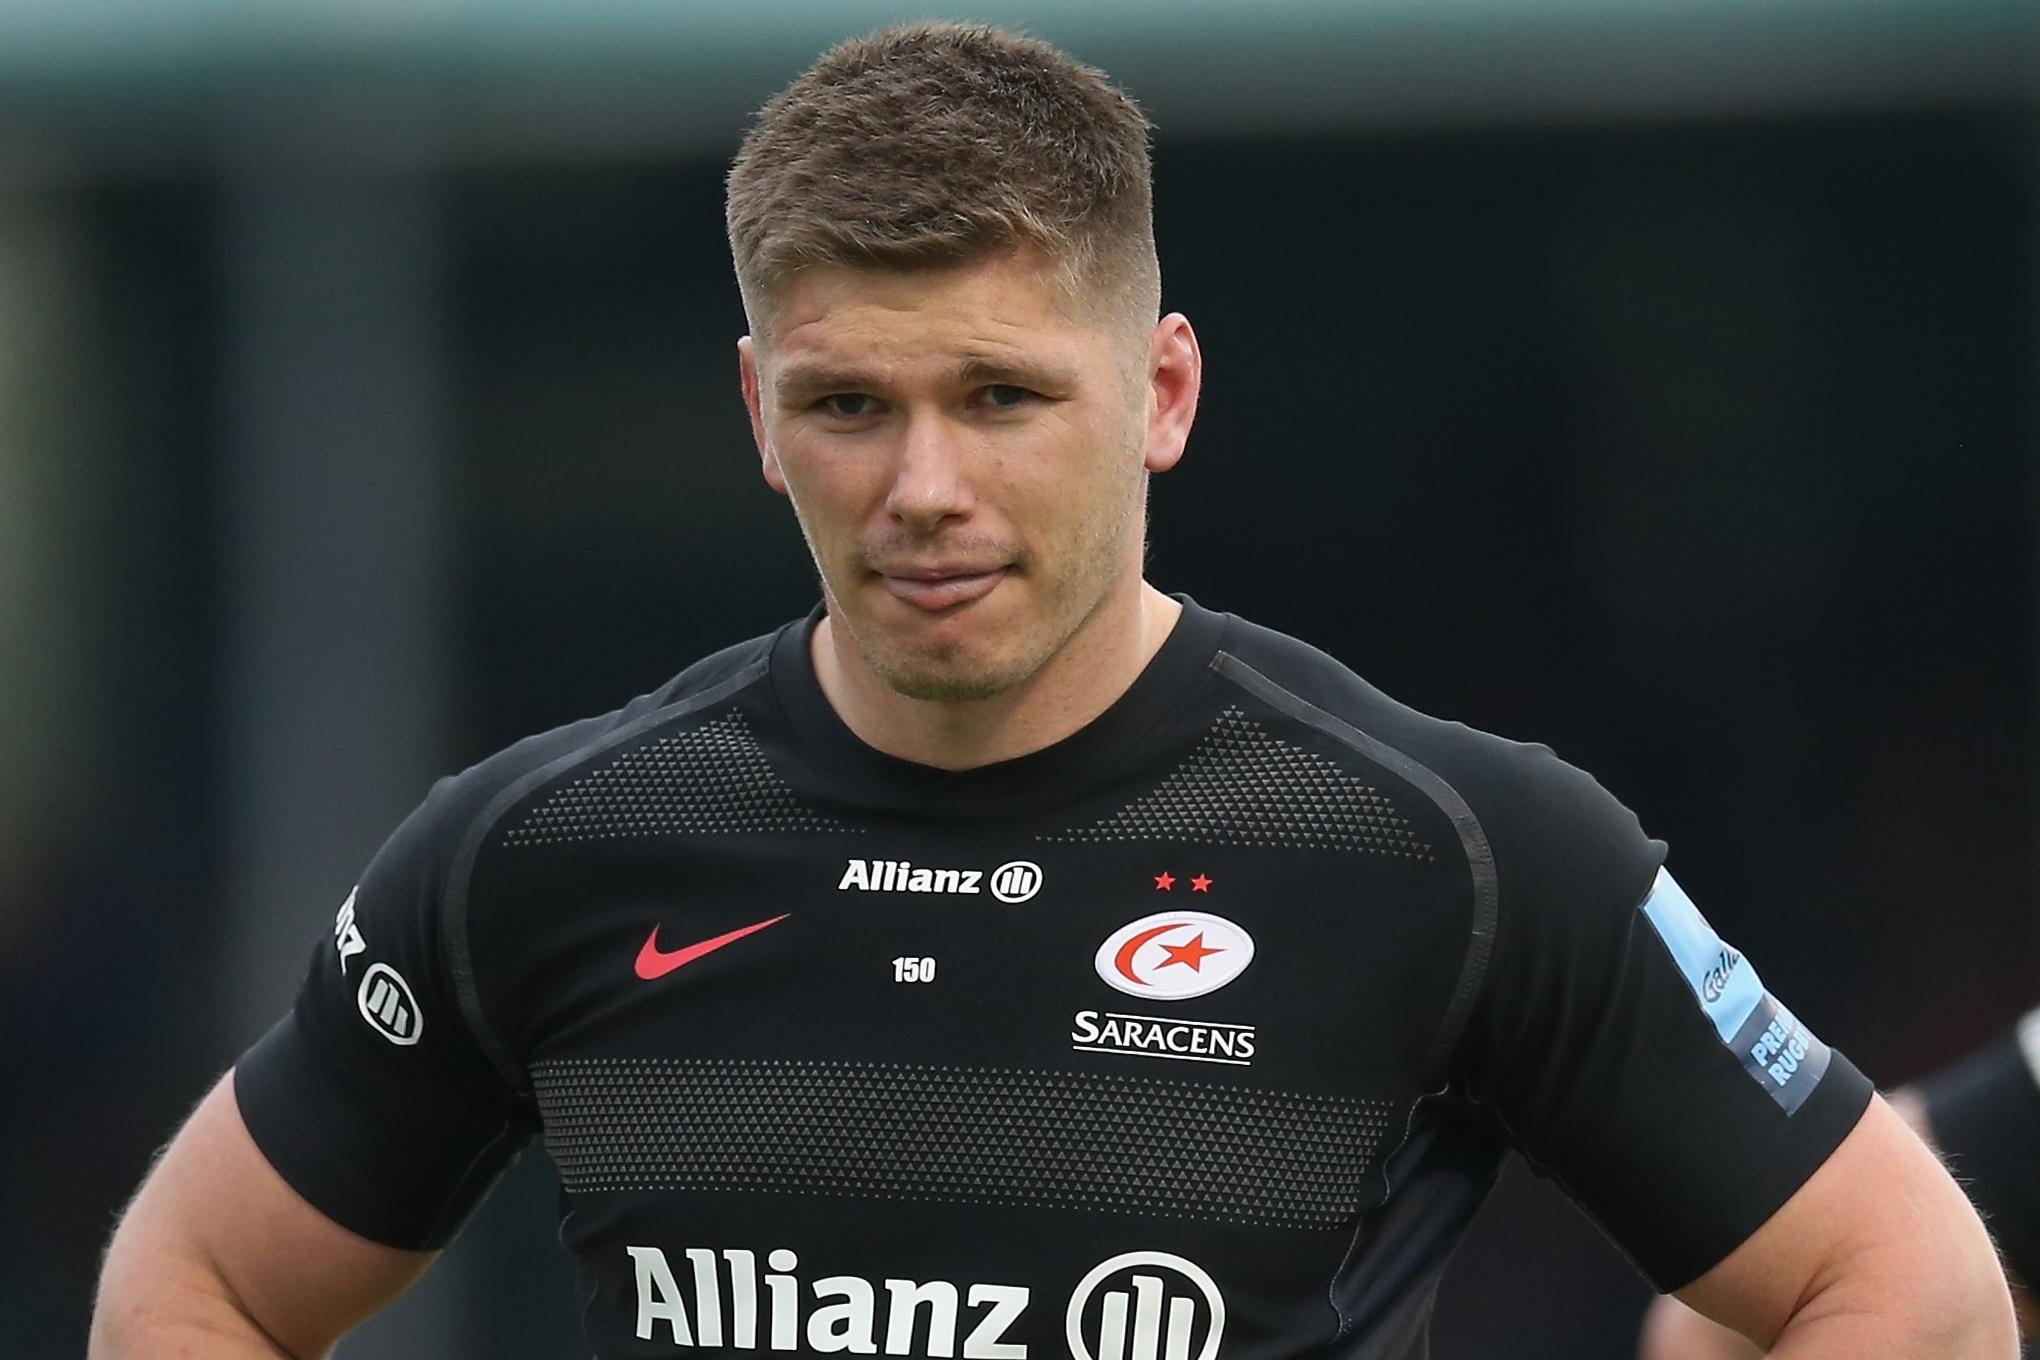 Owen Farrell: I don't think about what happened at training when I'm home with my child